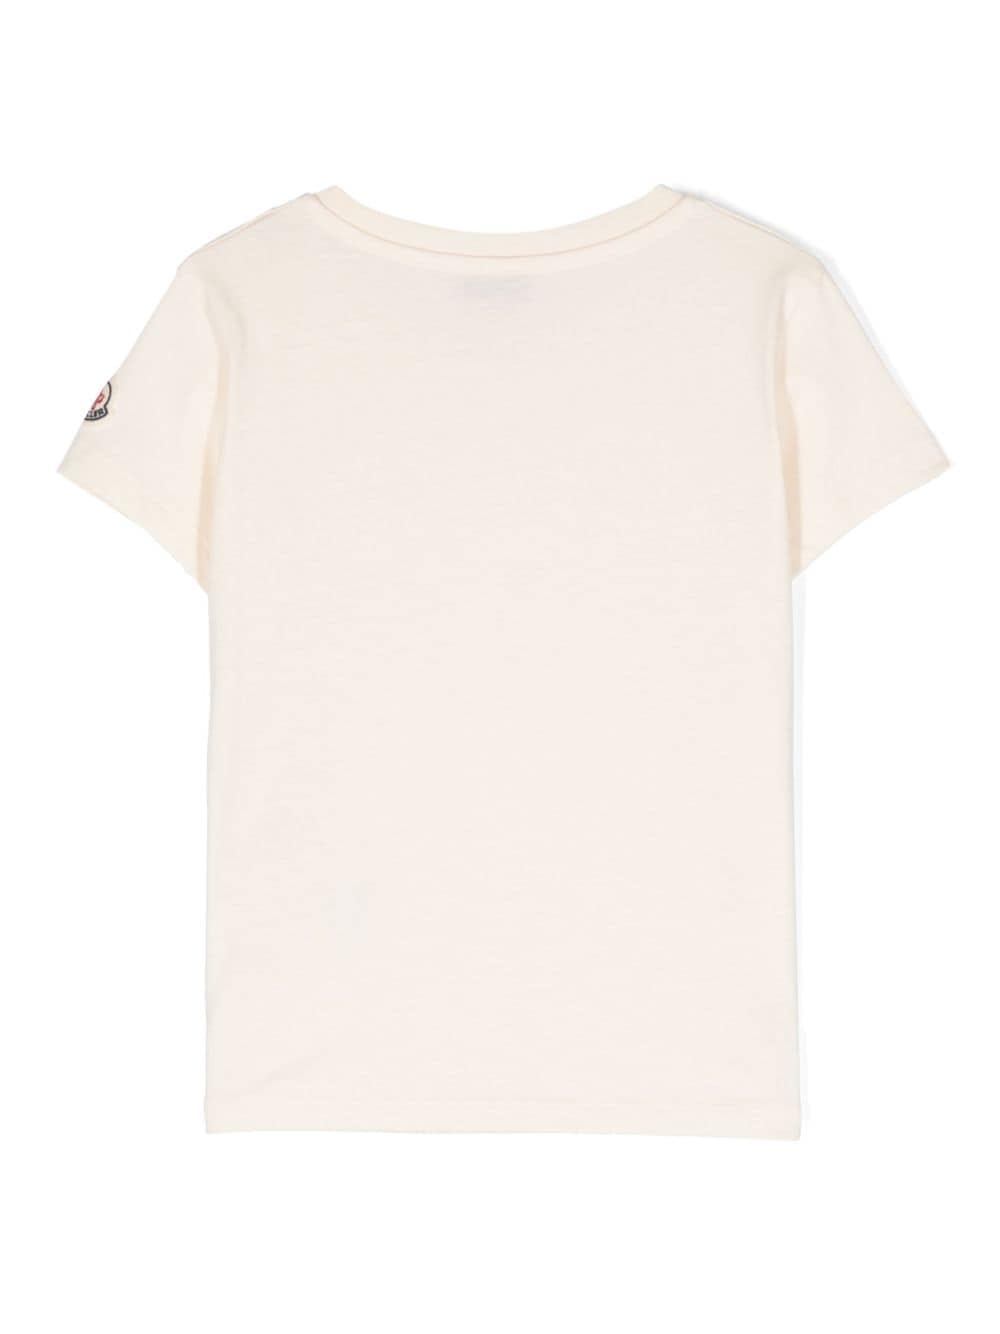 Ivory t-shirt for girls with all-over logo